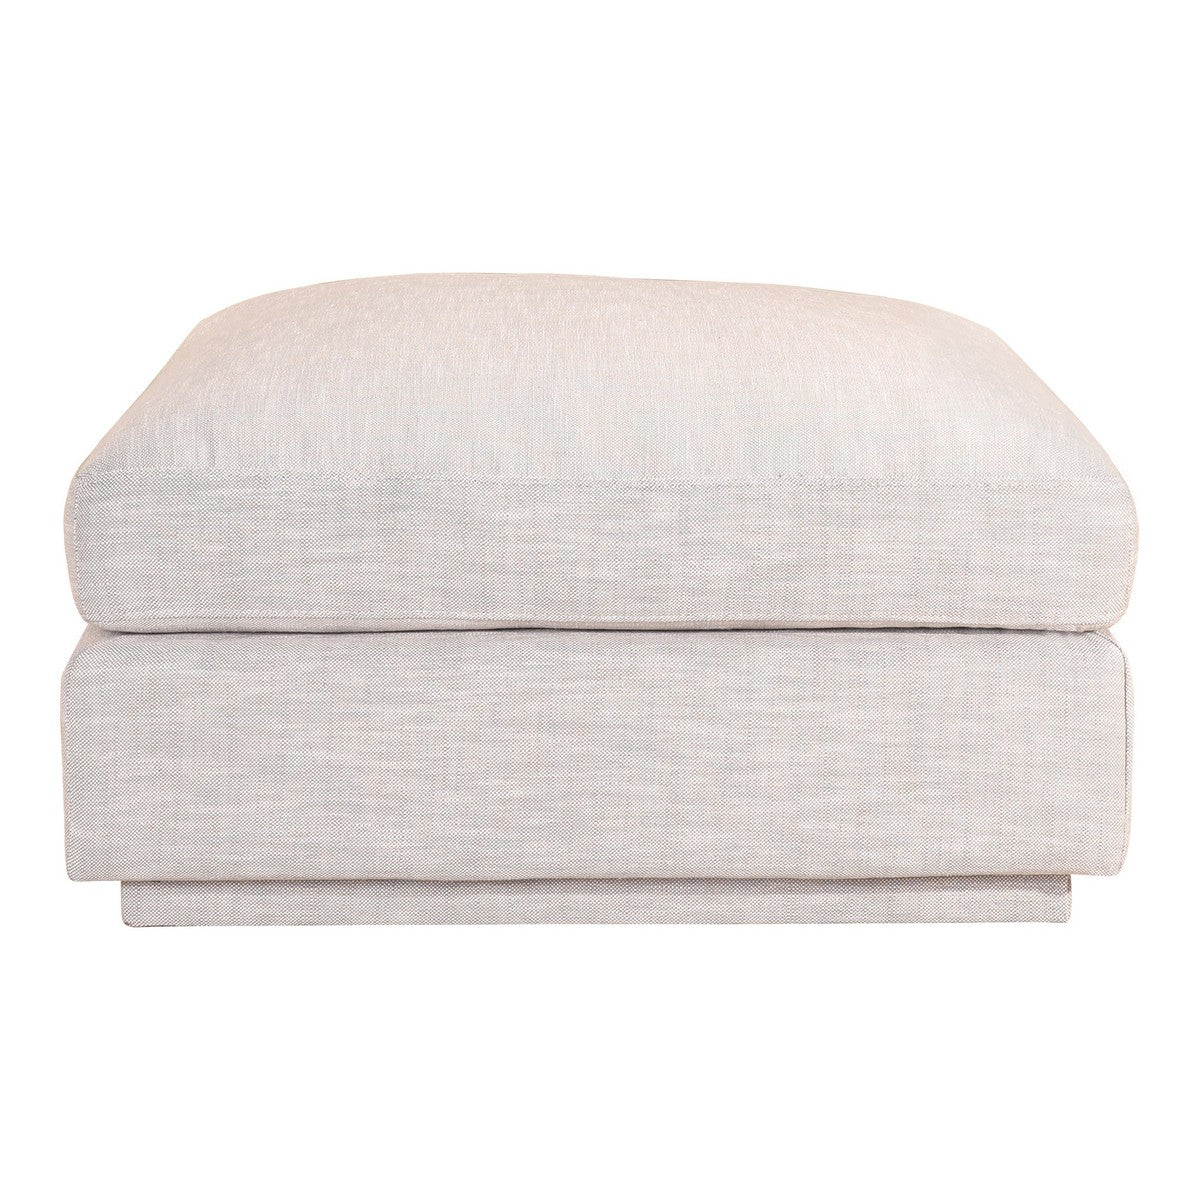 Moe's Home Collection Justin Ottoman Taupe - RN-1101-39 - Moe's Home Collection - Ottomans - Minimal And Modern - 1